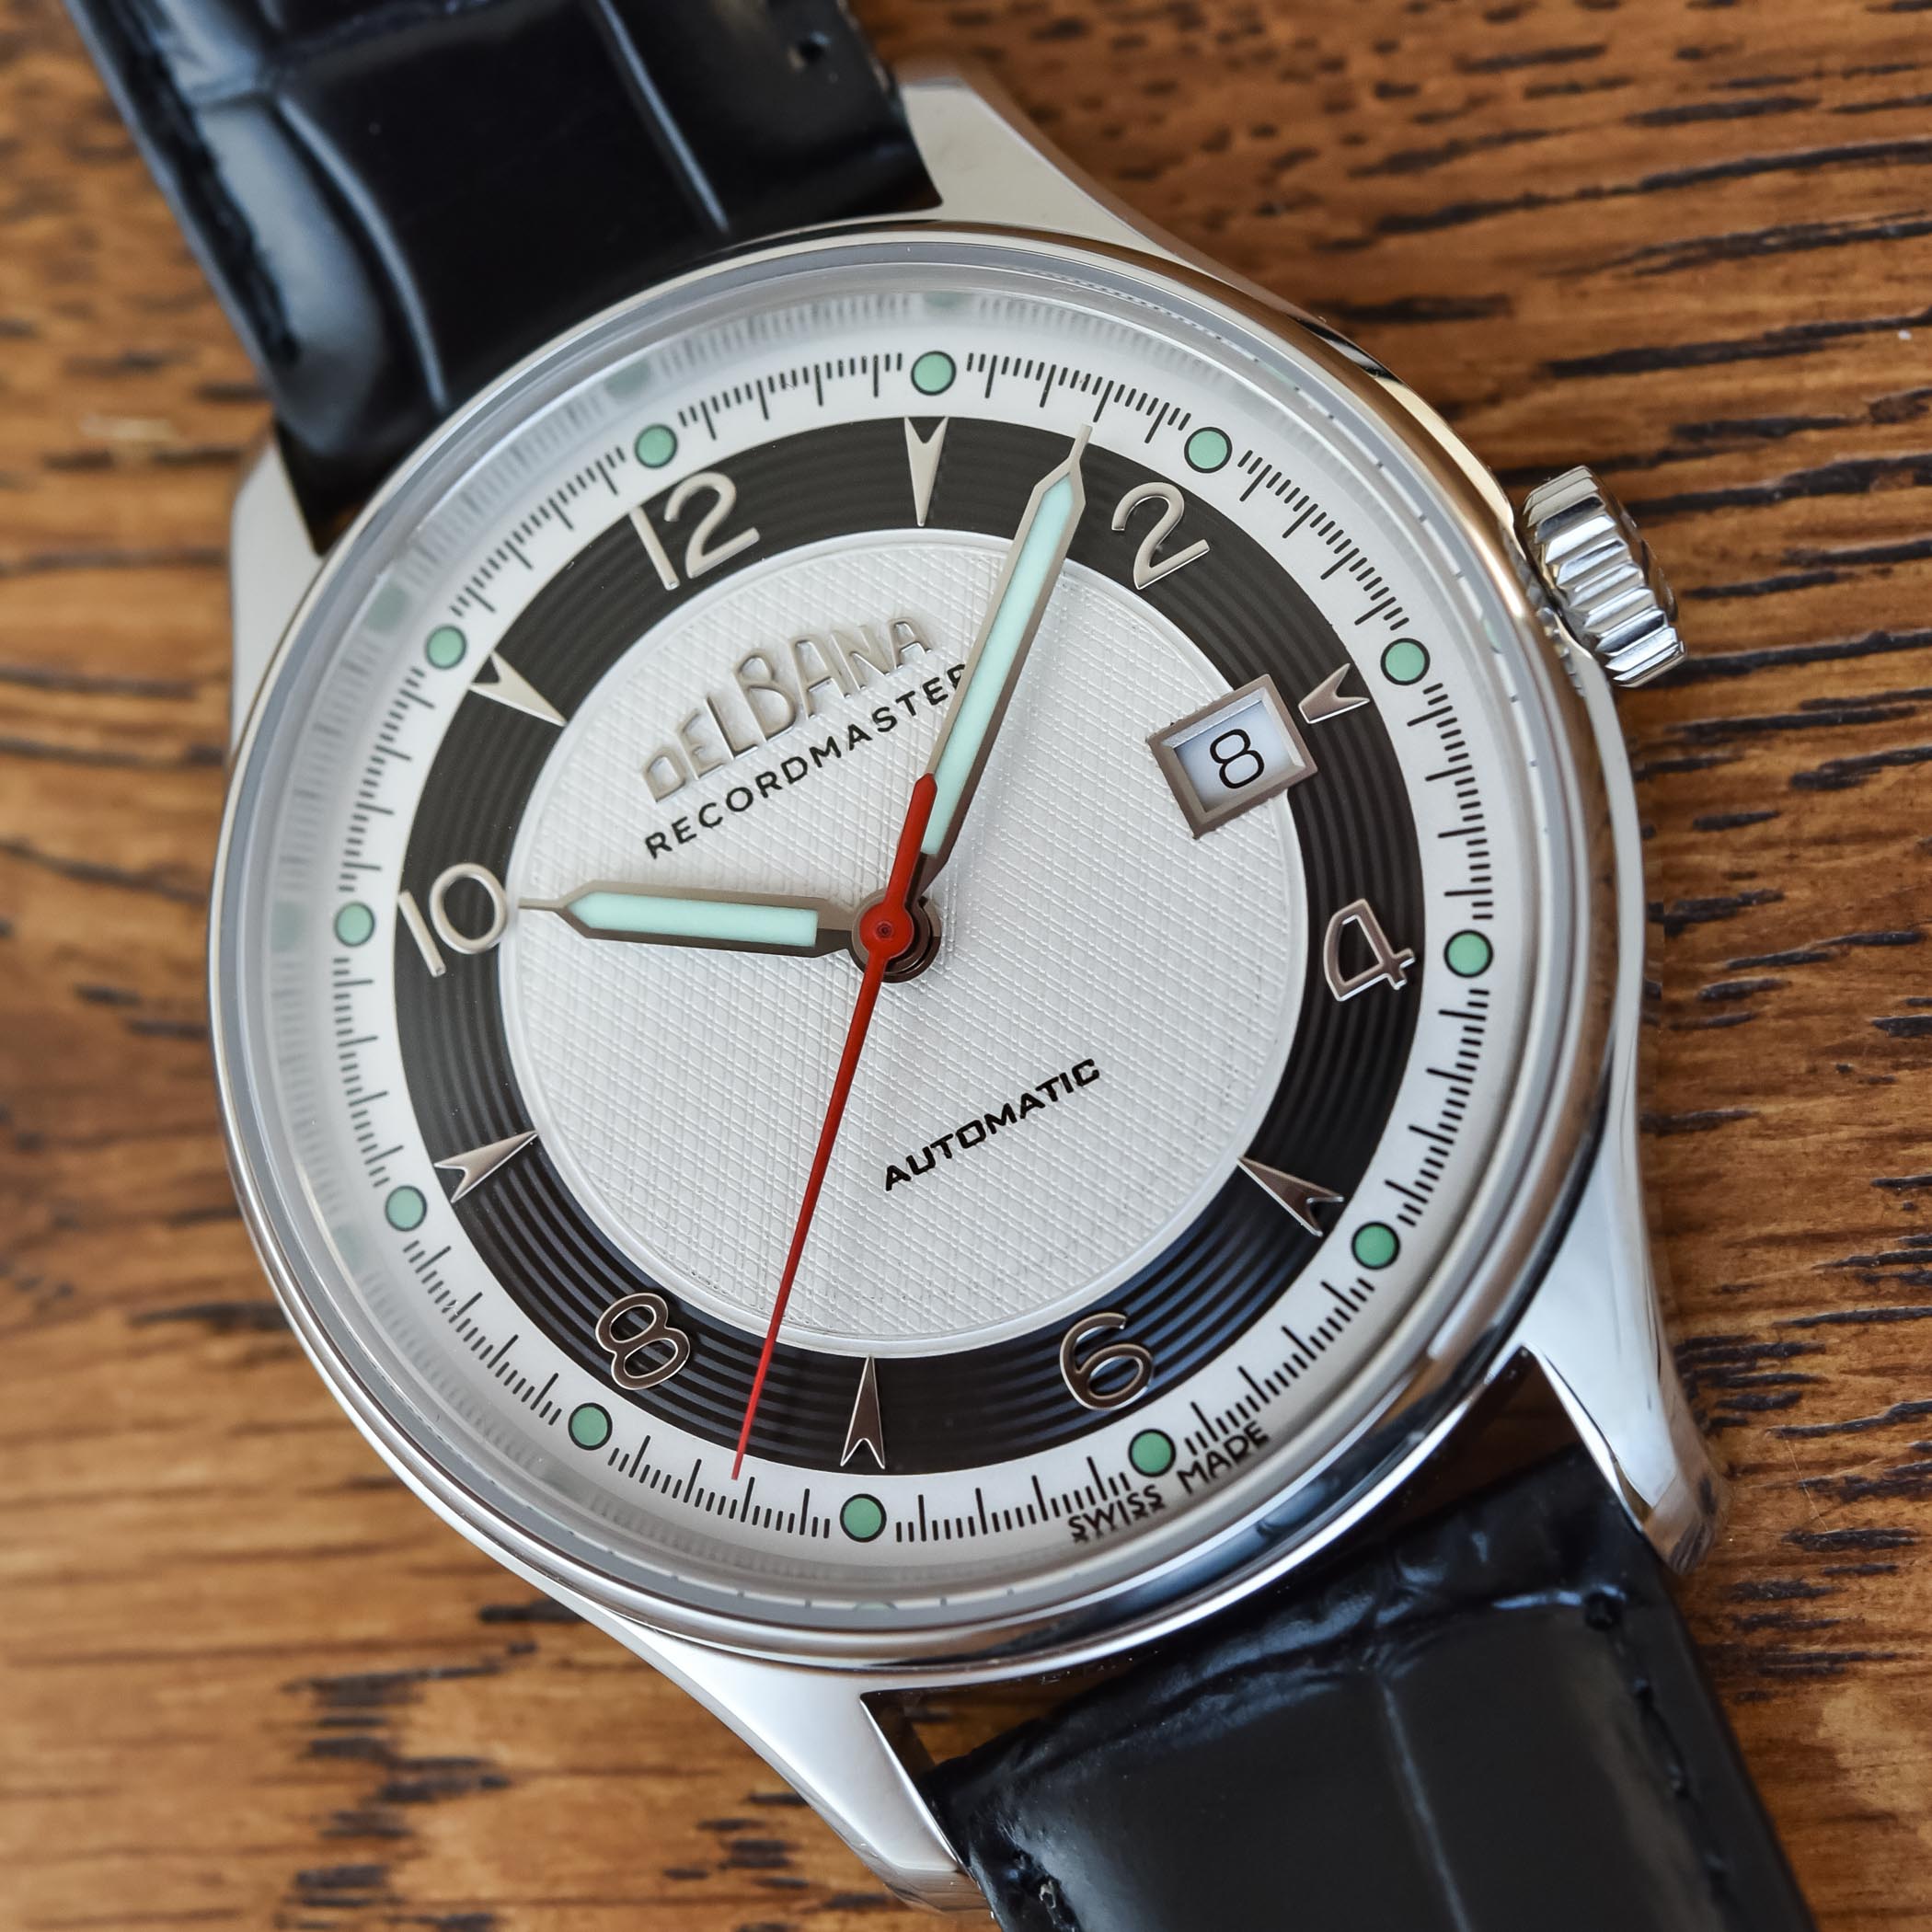 Delbana Recordmaster and Recordmaster II Limited Editions hands-on